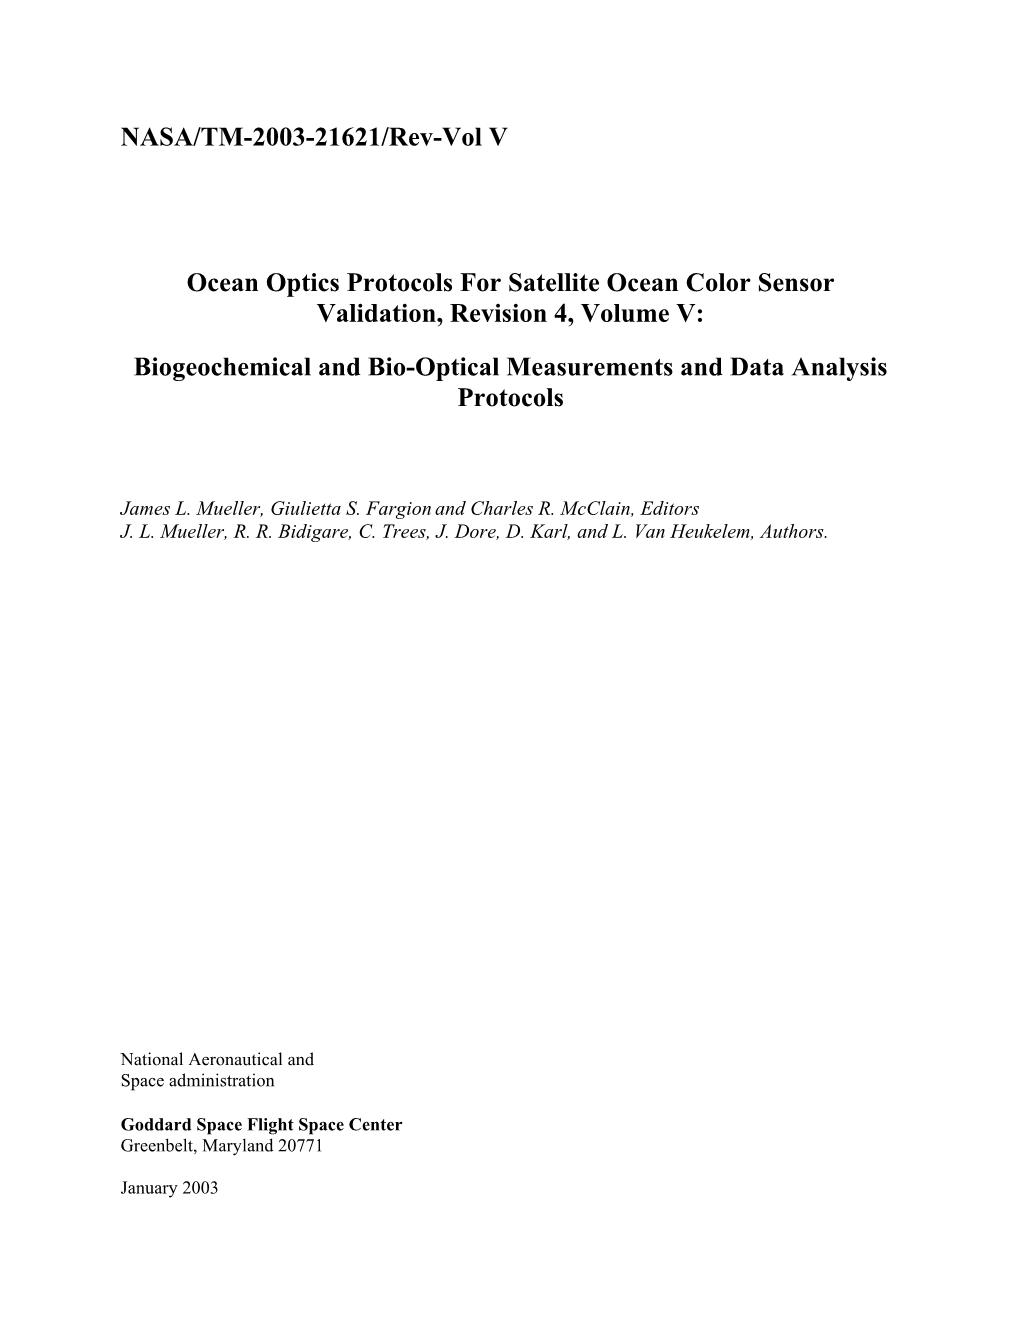 Chapter 2 HPLC Phytoplankton Pigments: Sampling, Laboratory Methods, and Quality Assurance Procedures